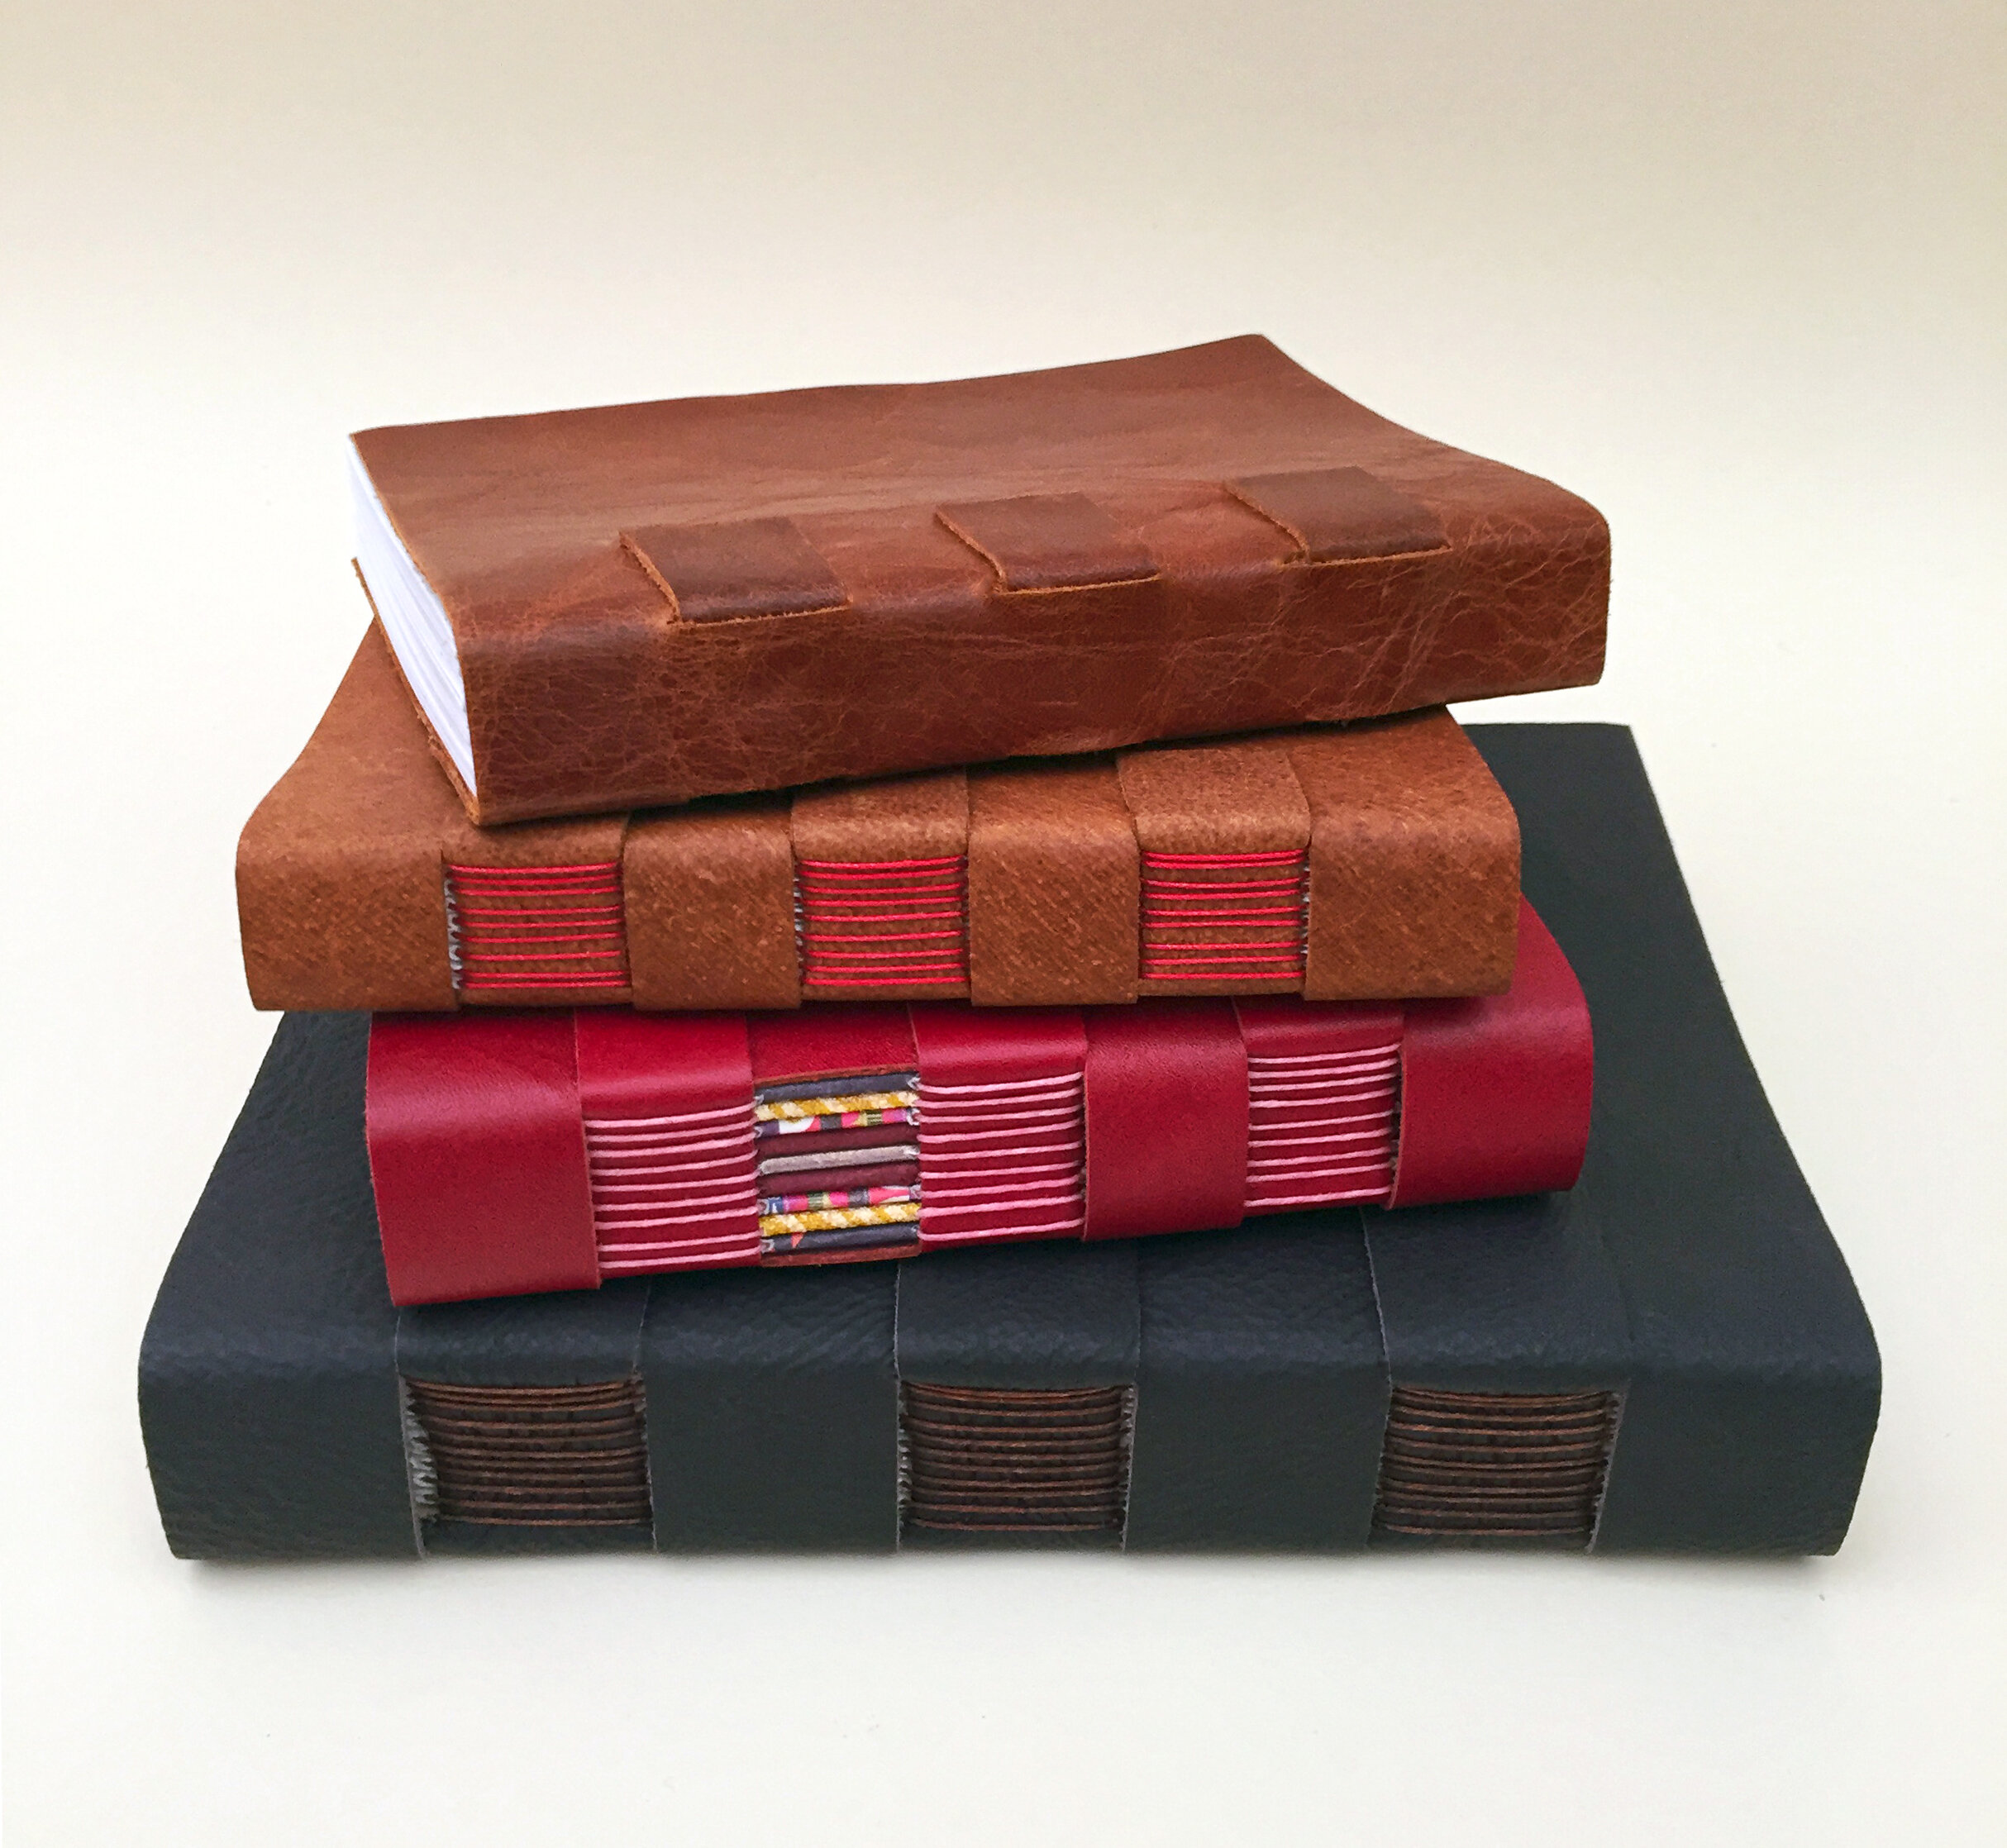 How to Make a Leather Journal  Bookbinding Tutorial For Beginners